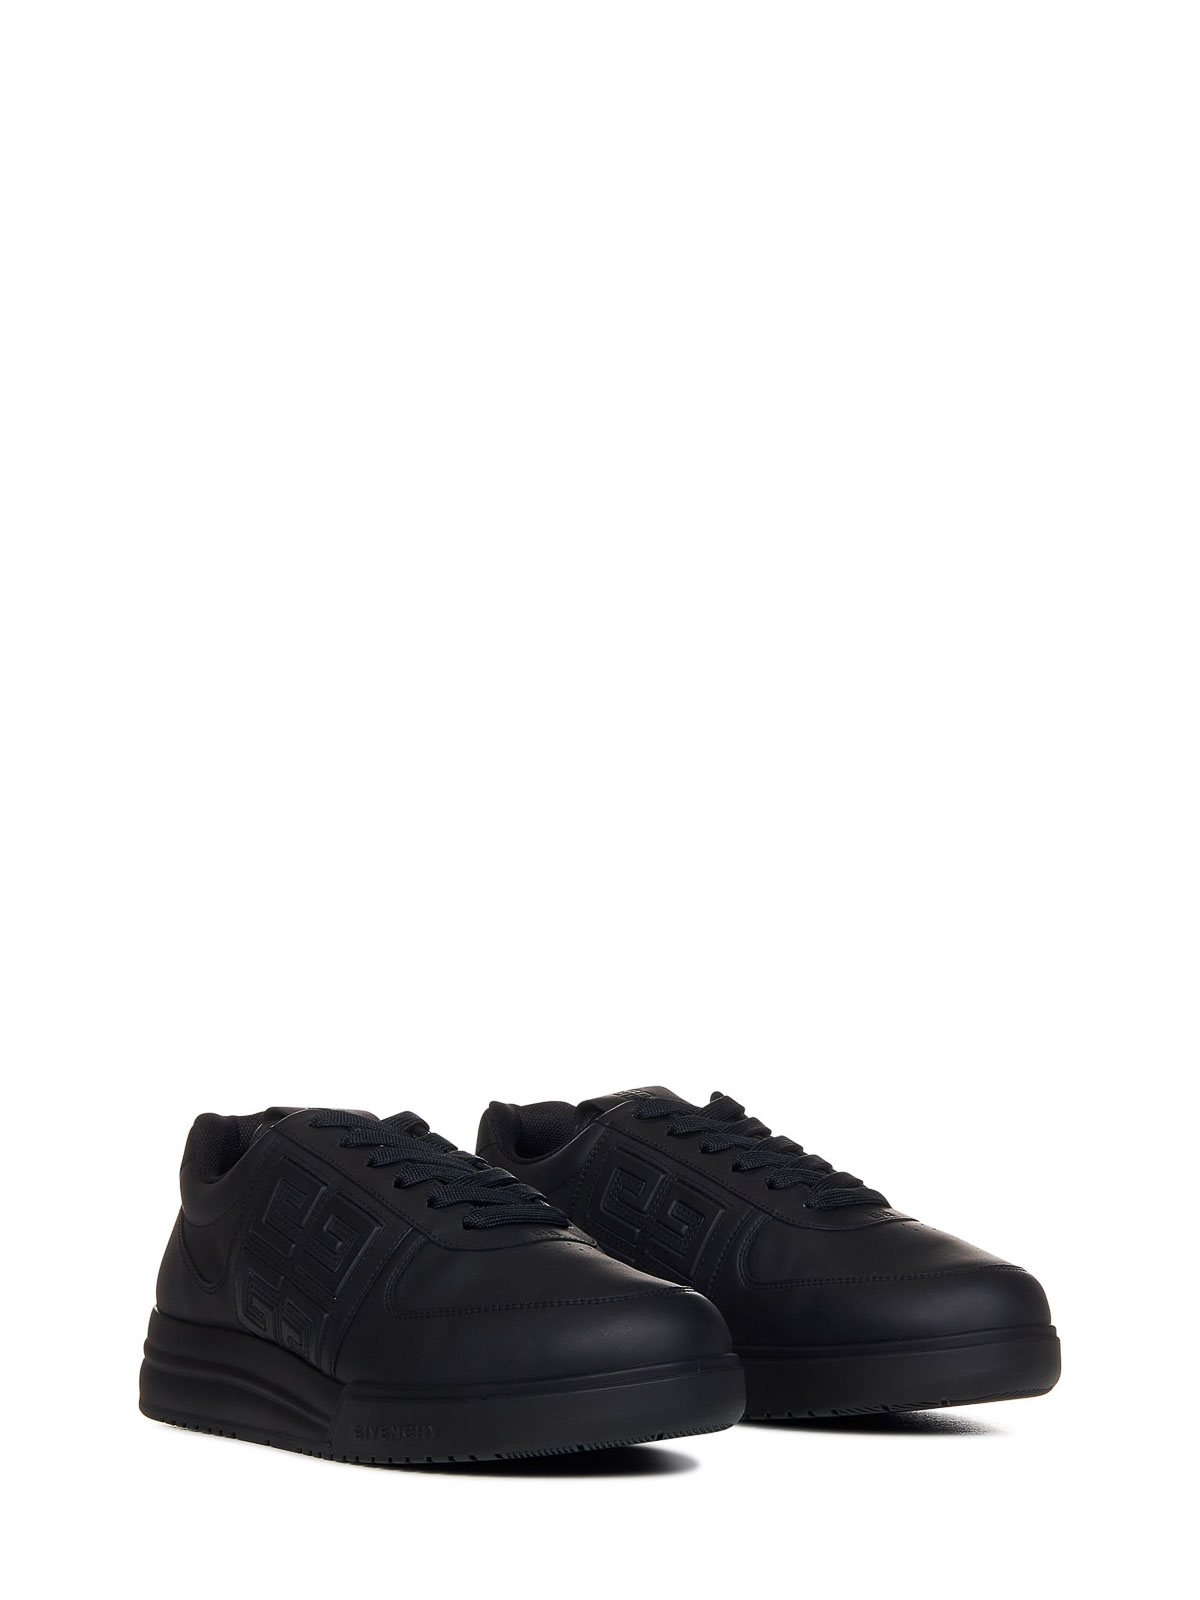 Shop Givenchy Black Calf Leather Low-top Sneakers